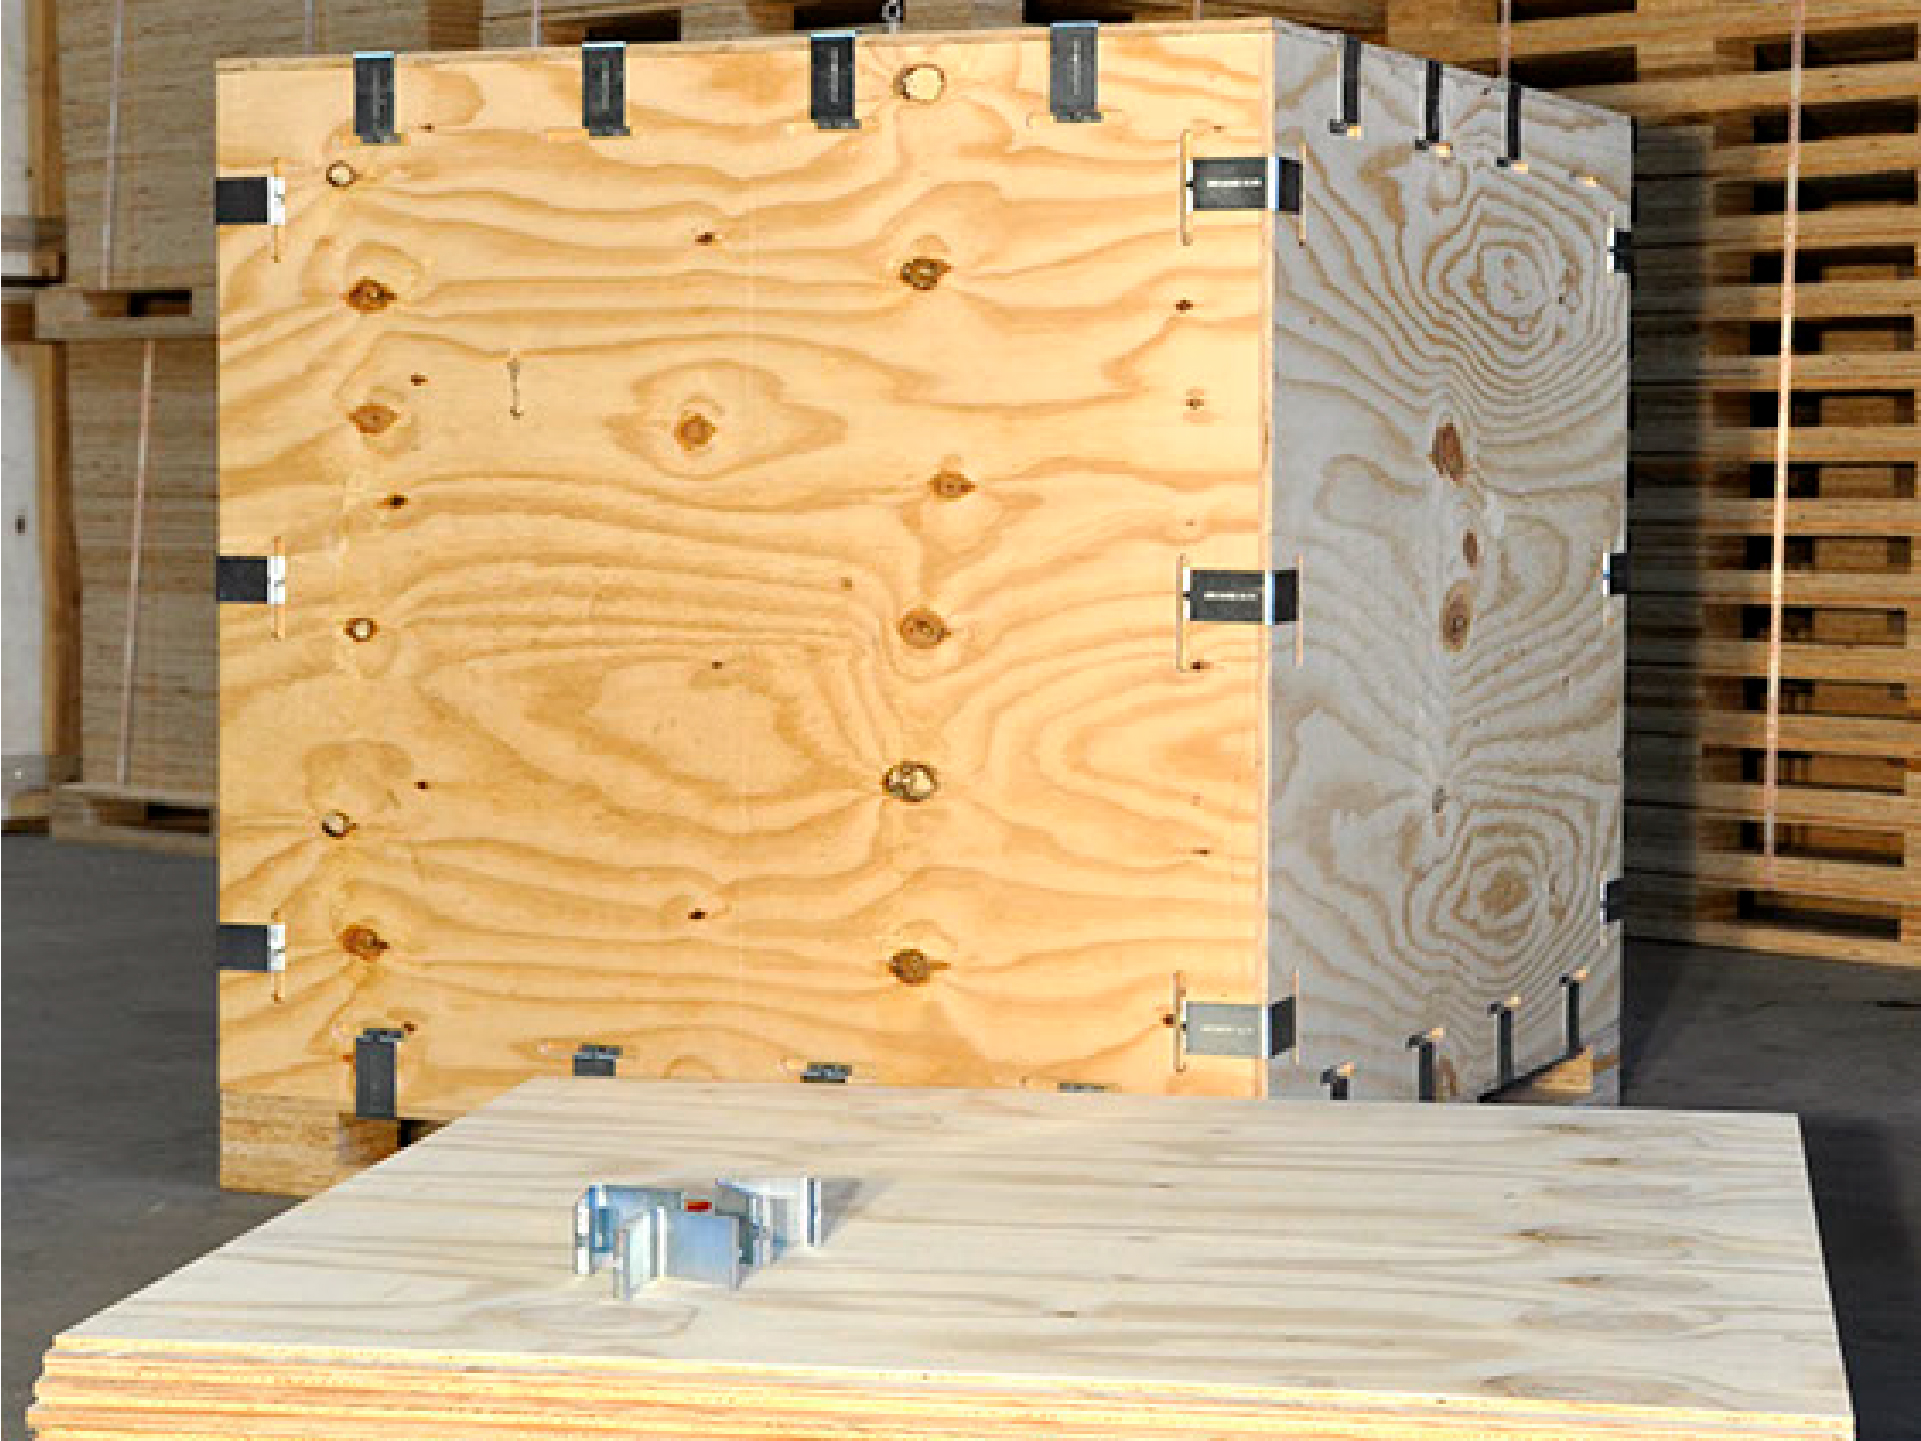 18mm plywood export crate - Crocodile collapsible system